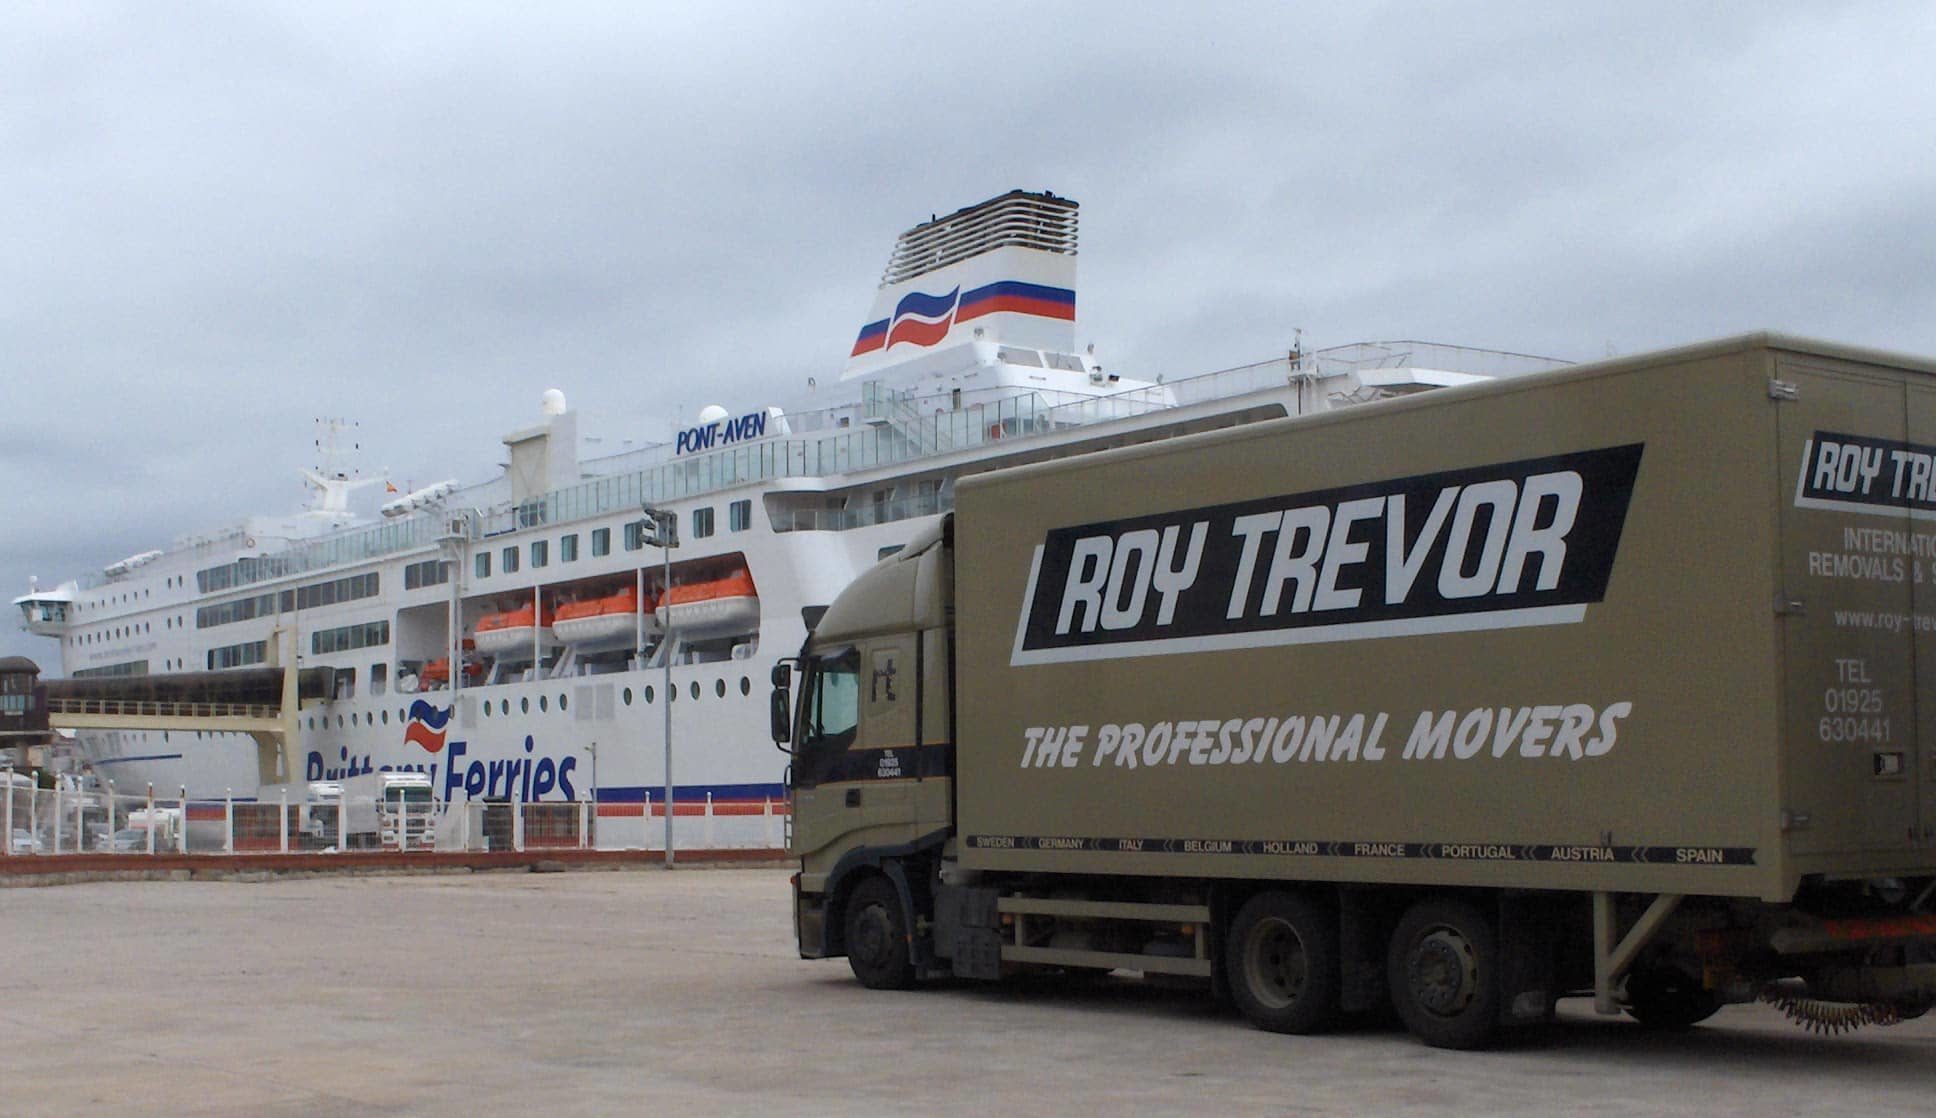 Roy Trevor vehicle waiting to board Brittany Ferries